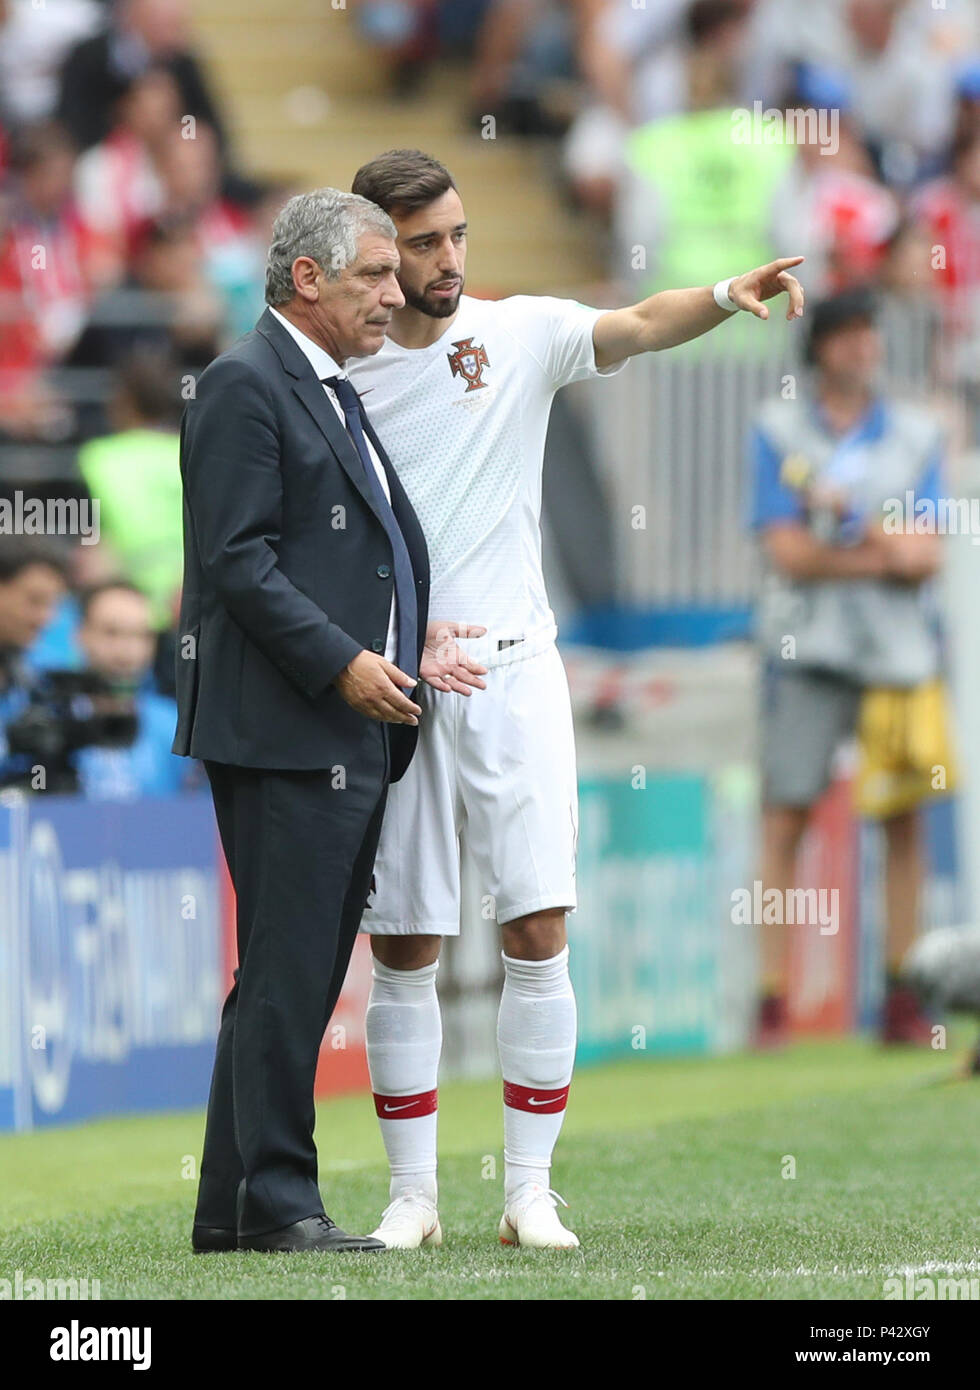 Moscow, Russia. 20th June, 2018. Portugal's head coach Fernando Santos (L) talks to Bruno Fernandes during a Group B match between Portugal and Morocco at the 2018 FIFA World Cup in Moscow, Russia, June 20, 2018. Credit: Xu Zijian/Xinhua/Alamy Live News Stock Photo